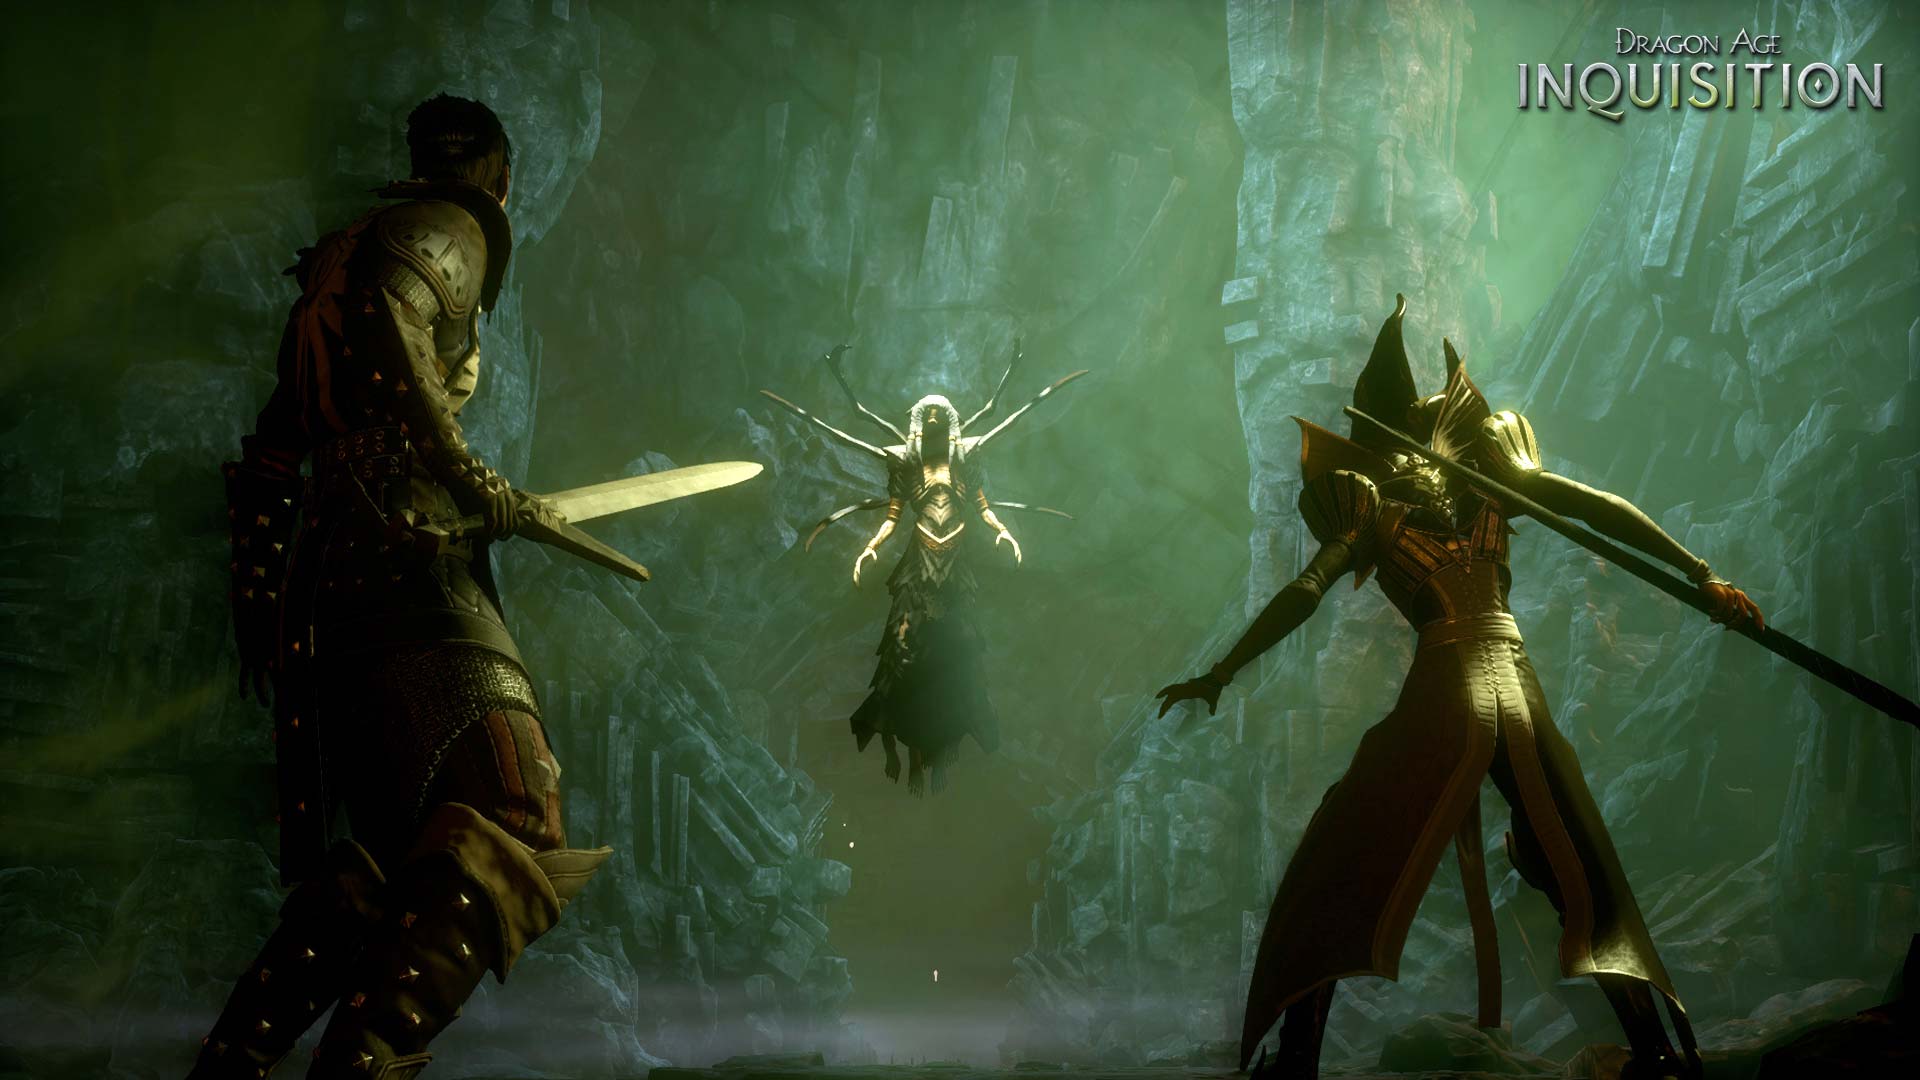 “Dragon Age: Inquisition” Started Off Differently - Started As Multiplayer-Only